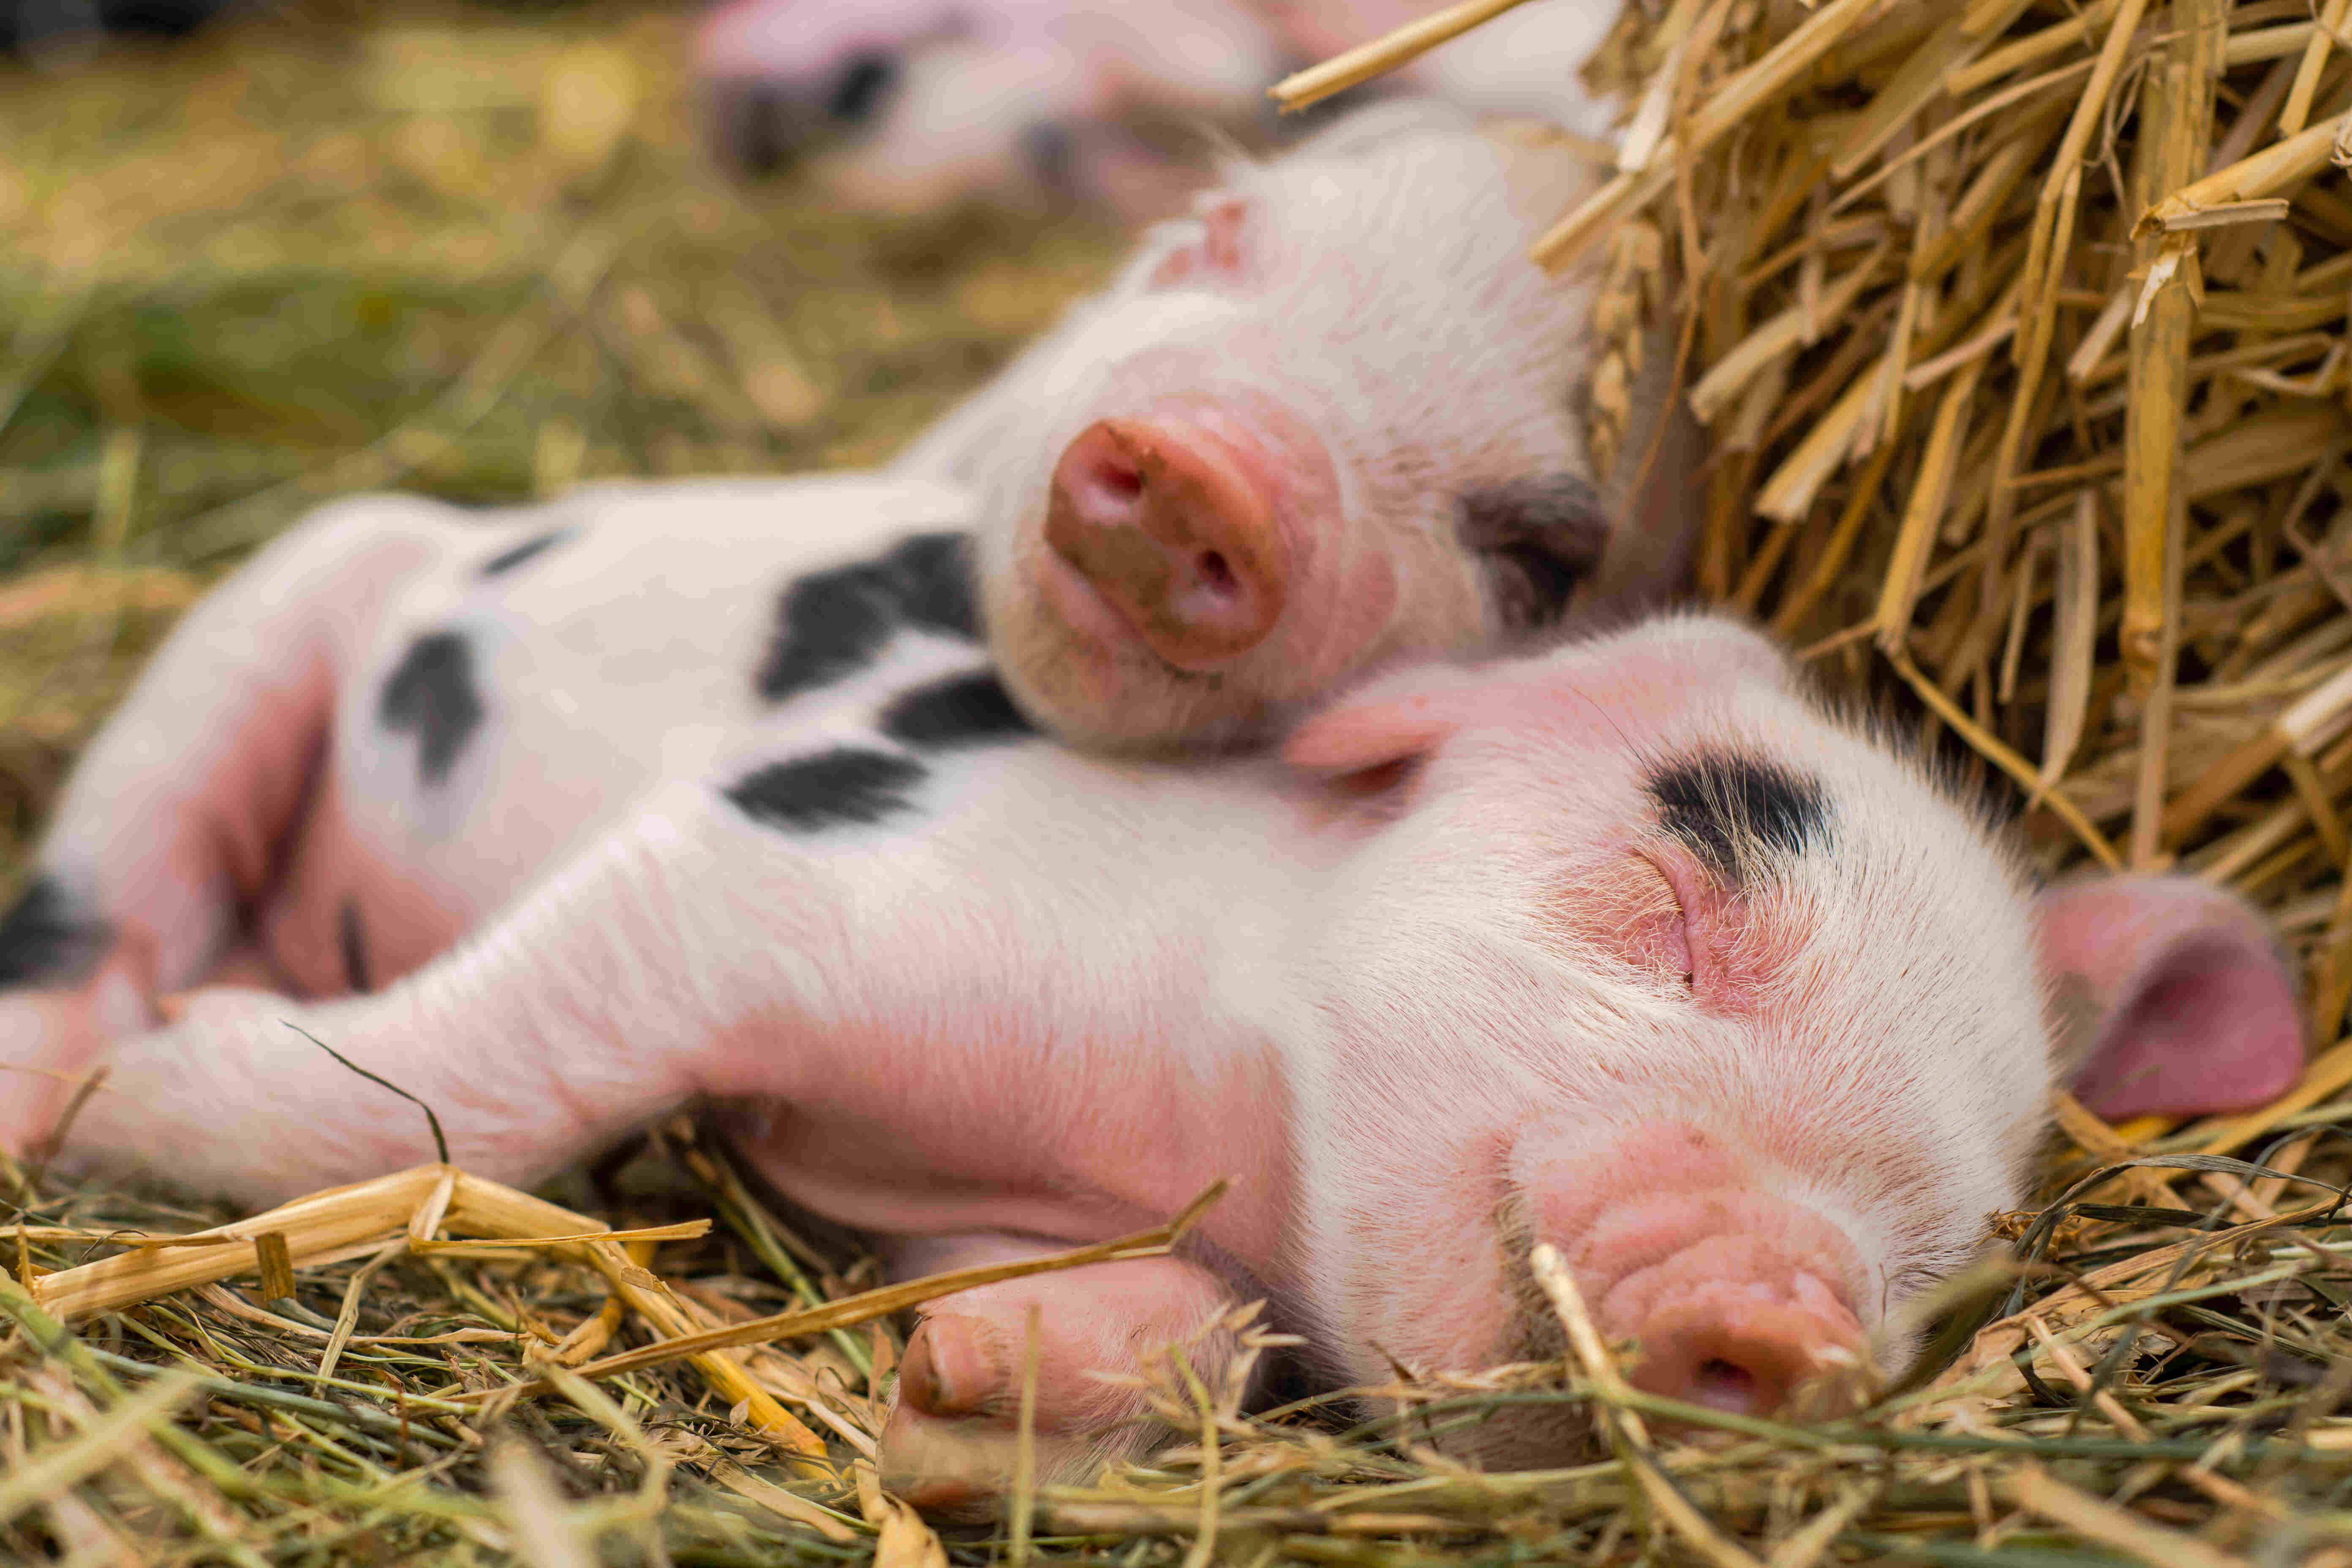 Two piglets sleeping together.